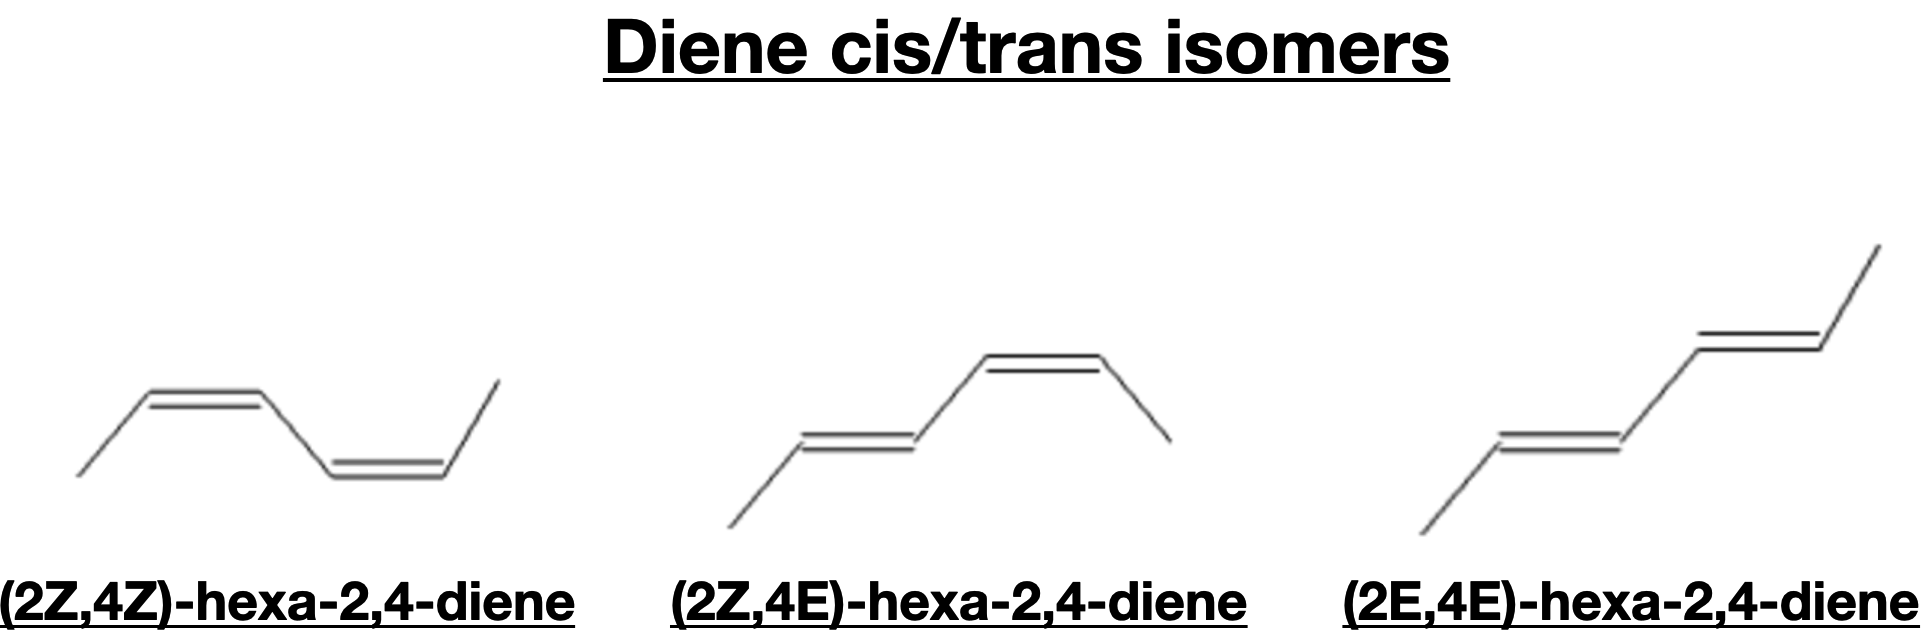 Introduction to Dienes - diene cis trans isomers